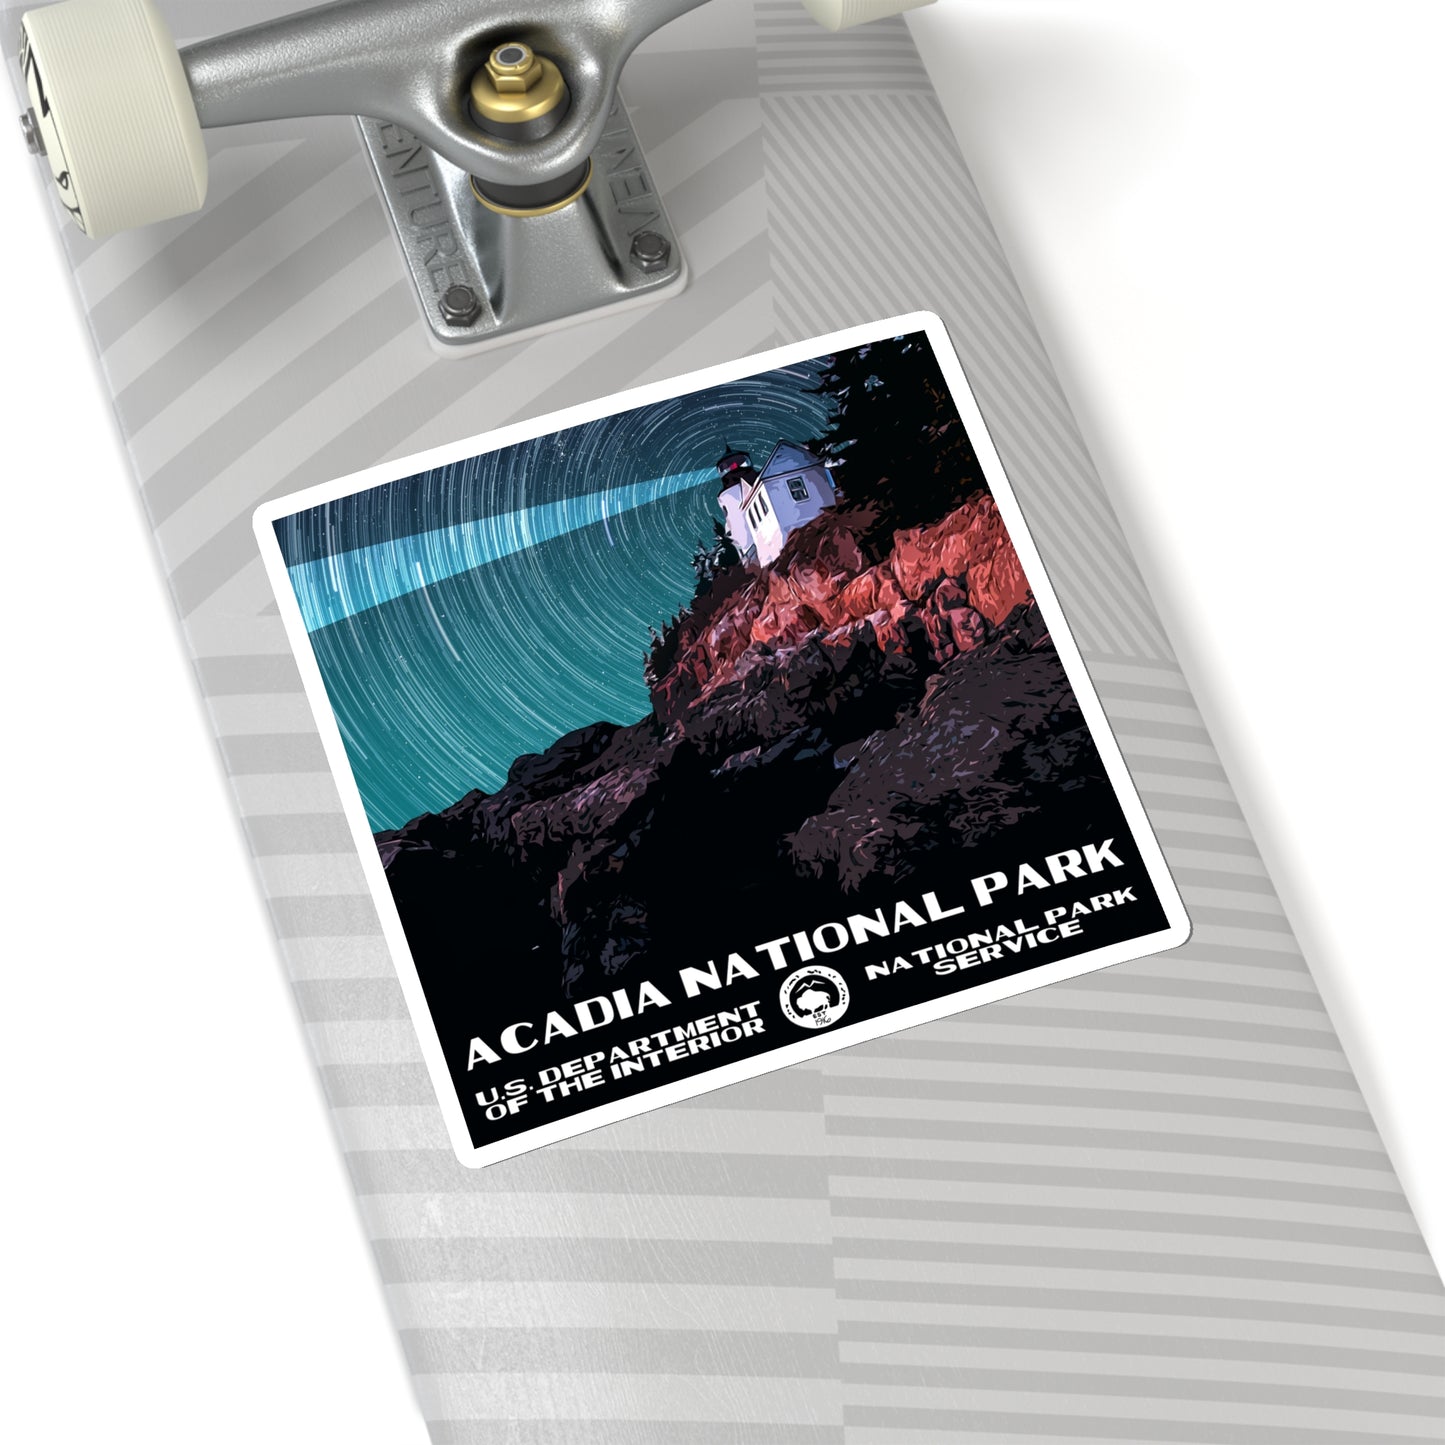 Acadia National Park Stickers